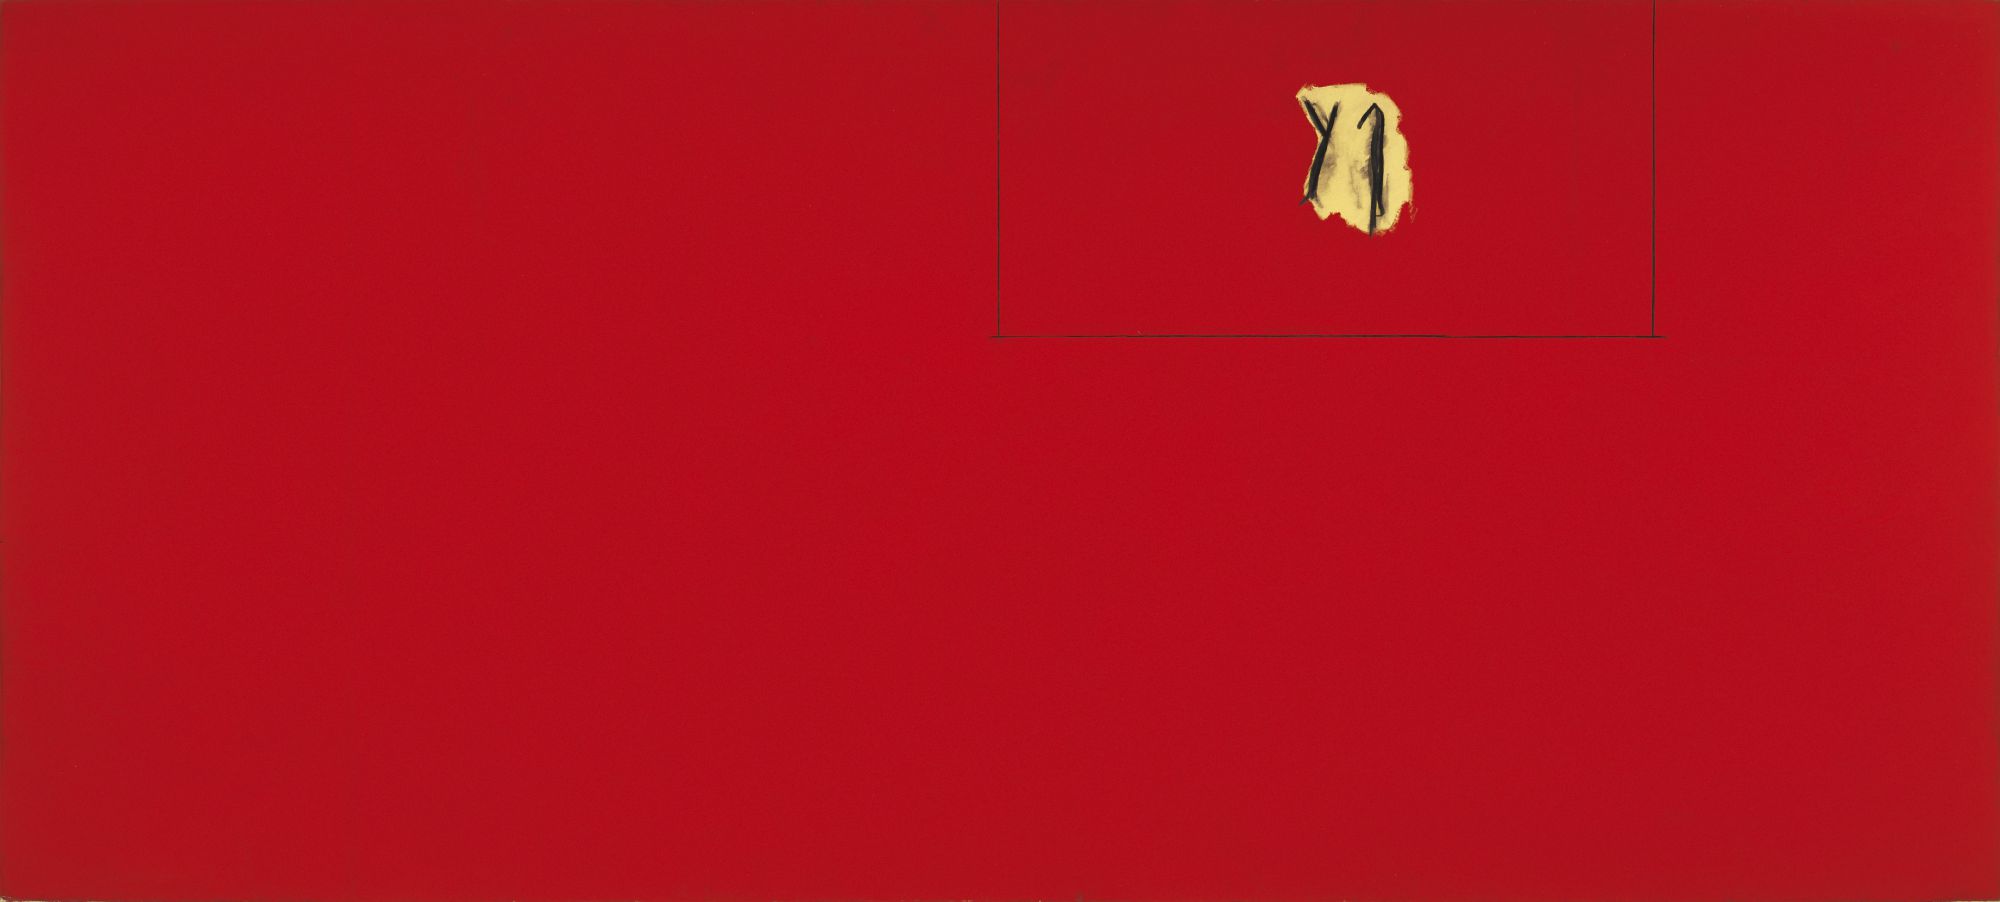 Phoenician Red Studio, 1977. Acrylic and charcoal on canvas, 86 x 192 inches (218.4 x 487.7 cm)